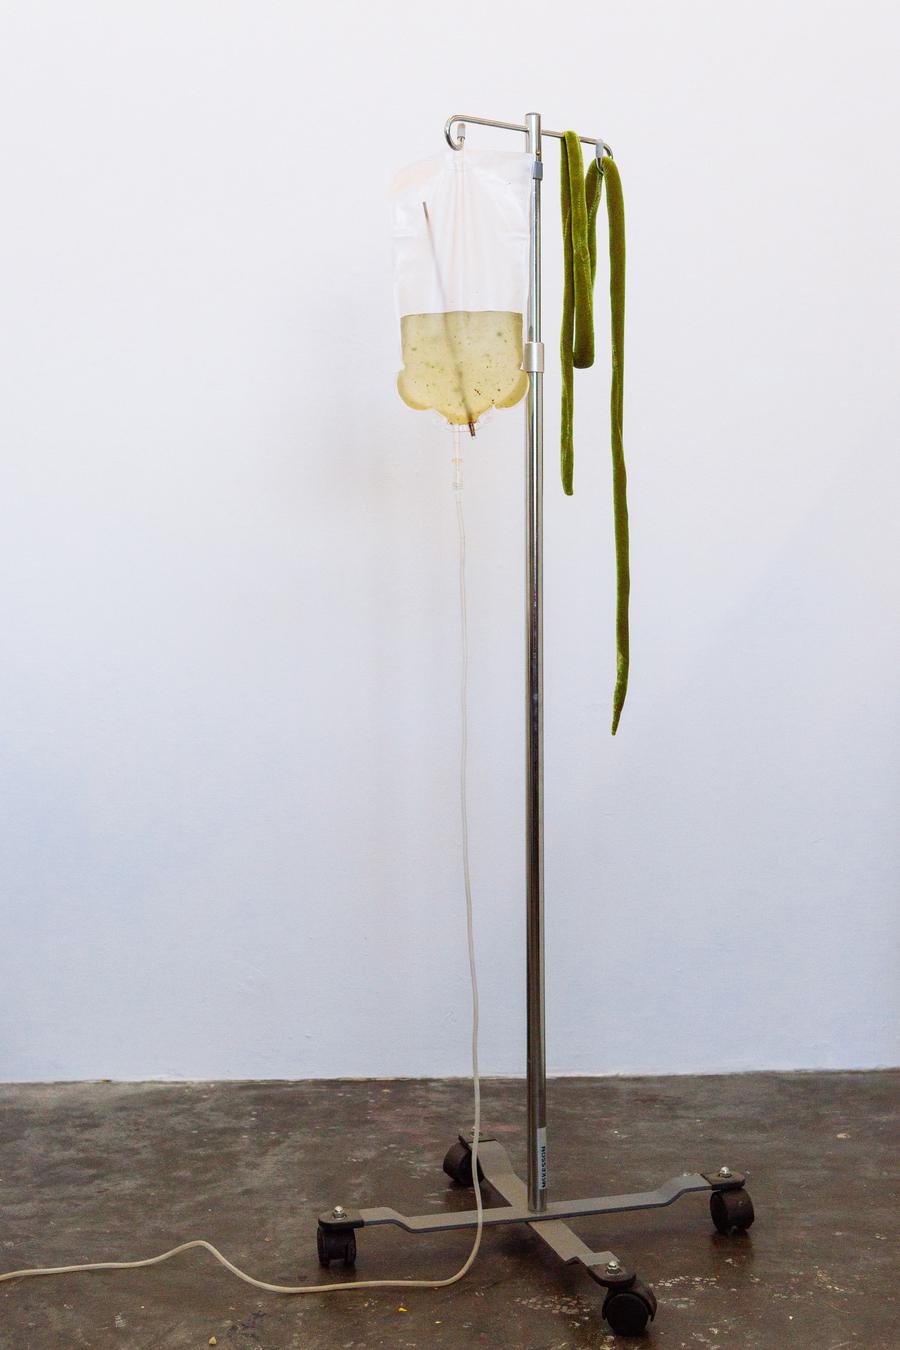 A metal IV stand on wheels holds up a clear IV Bag of greenish liquid. Small green blobs float around inside. Clear tubing cascades down to the ground and trails to the left of the image. A green velvet vine-like sculpture hangs on the right side of the IV stand.